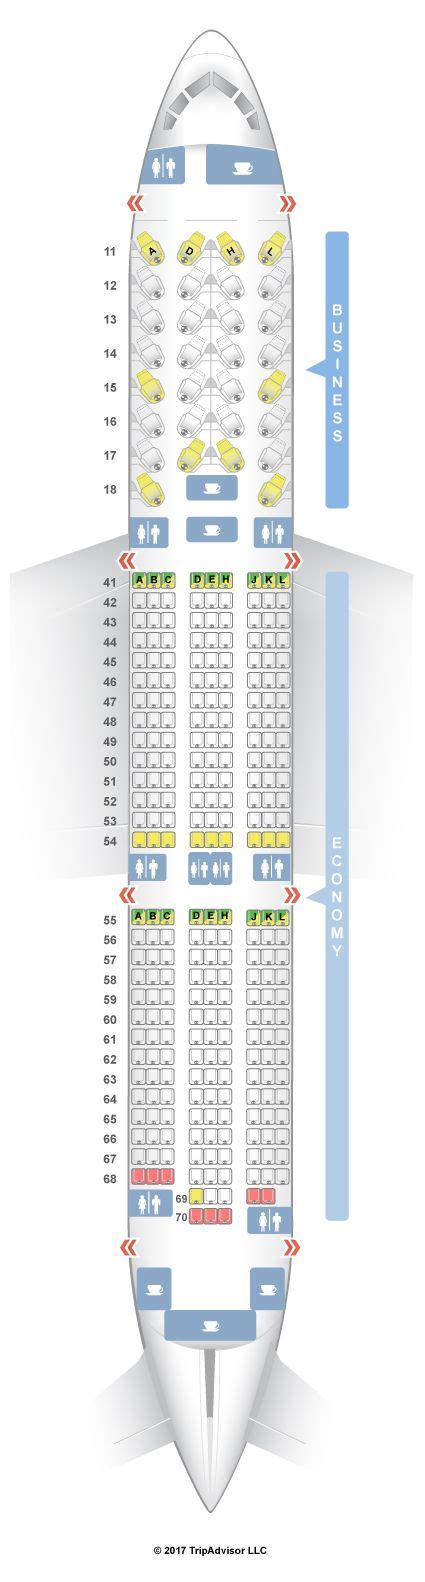 Air Canada 787 9 Seat Map Maping Resources